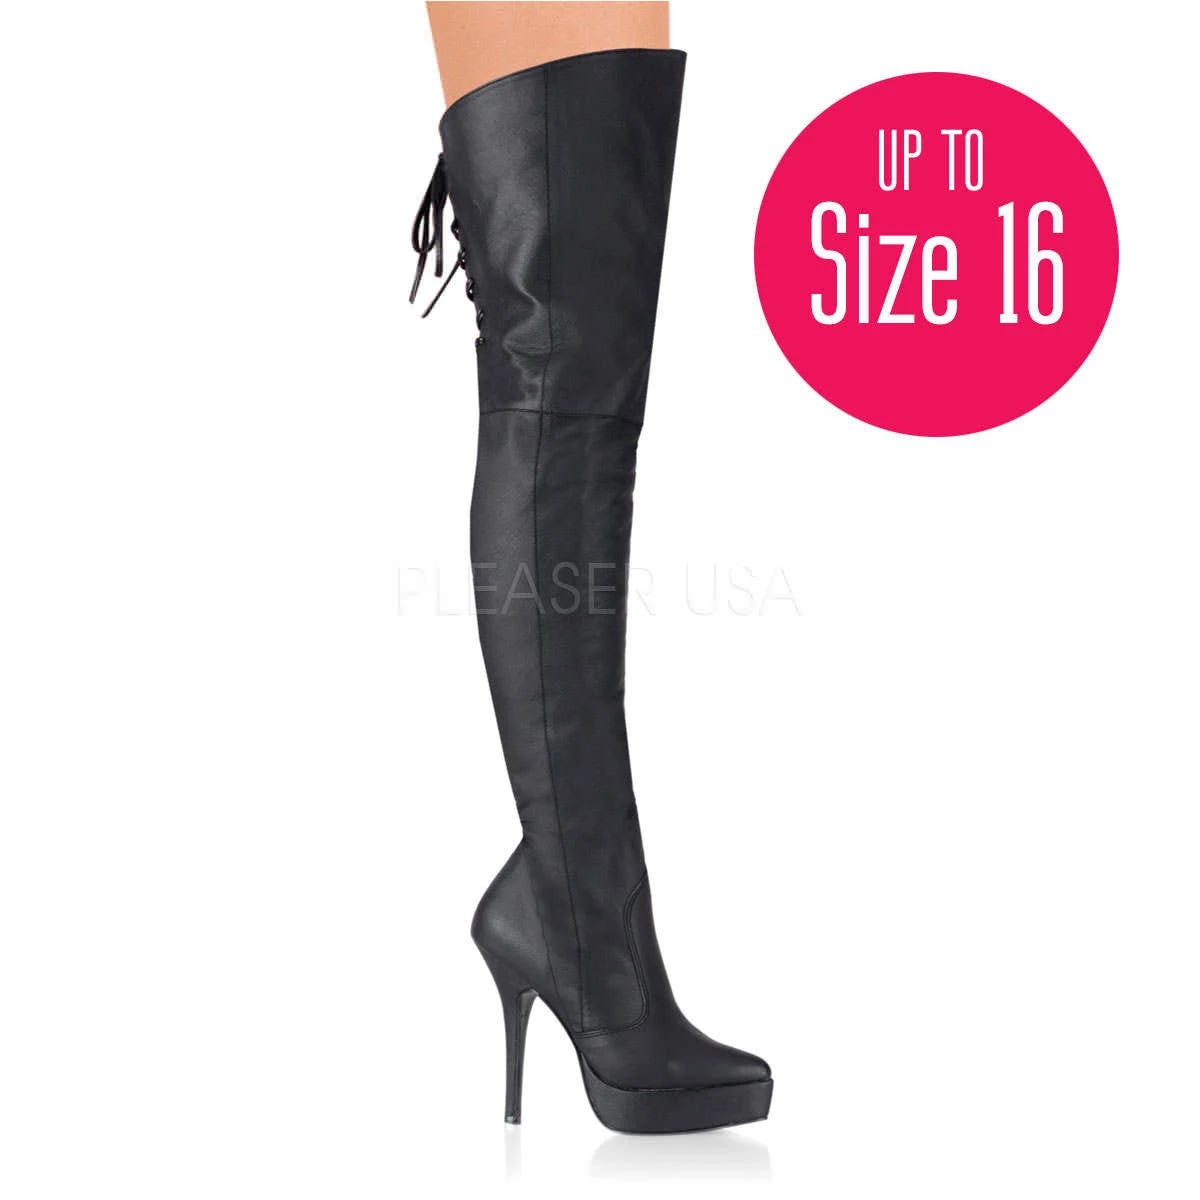 Black Stiletto Thigh High Boots with Zip-Up Closure | Image